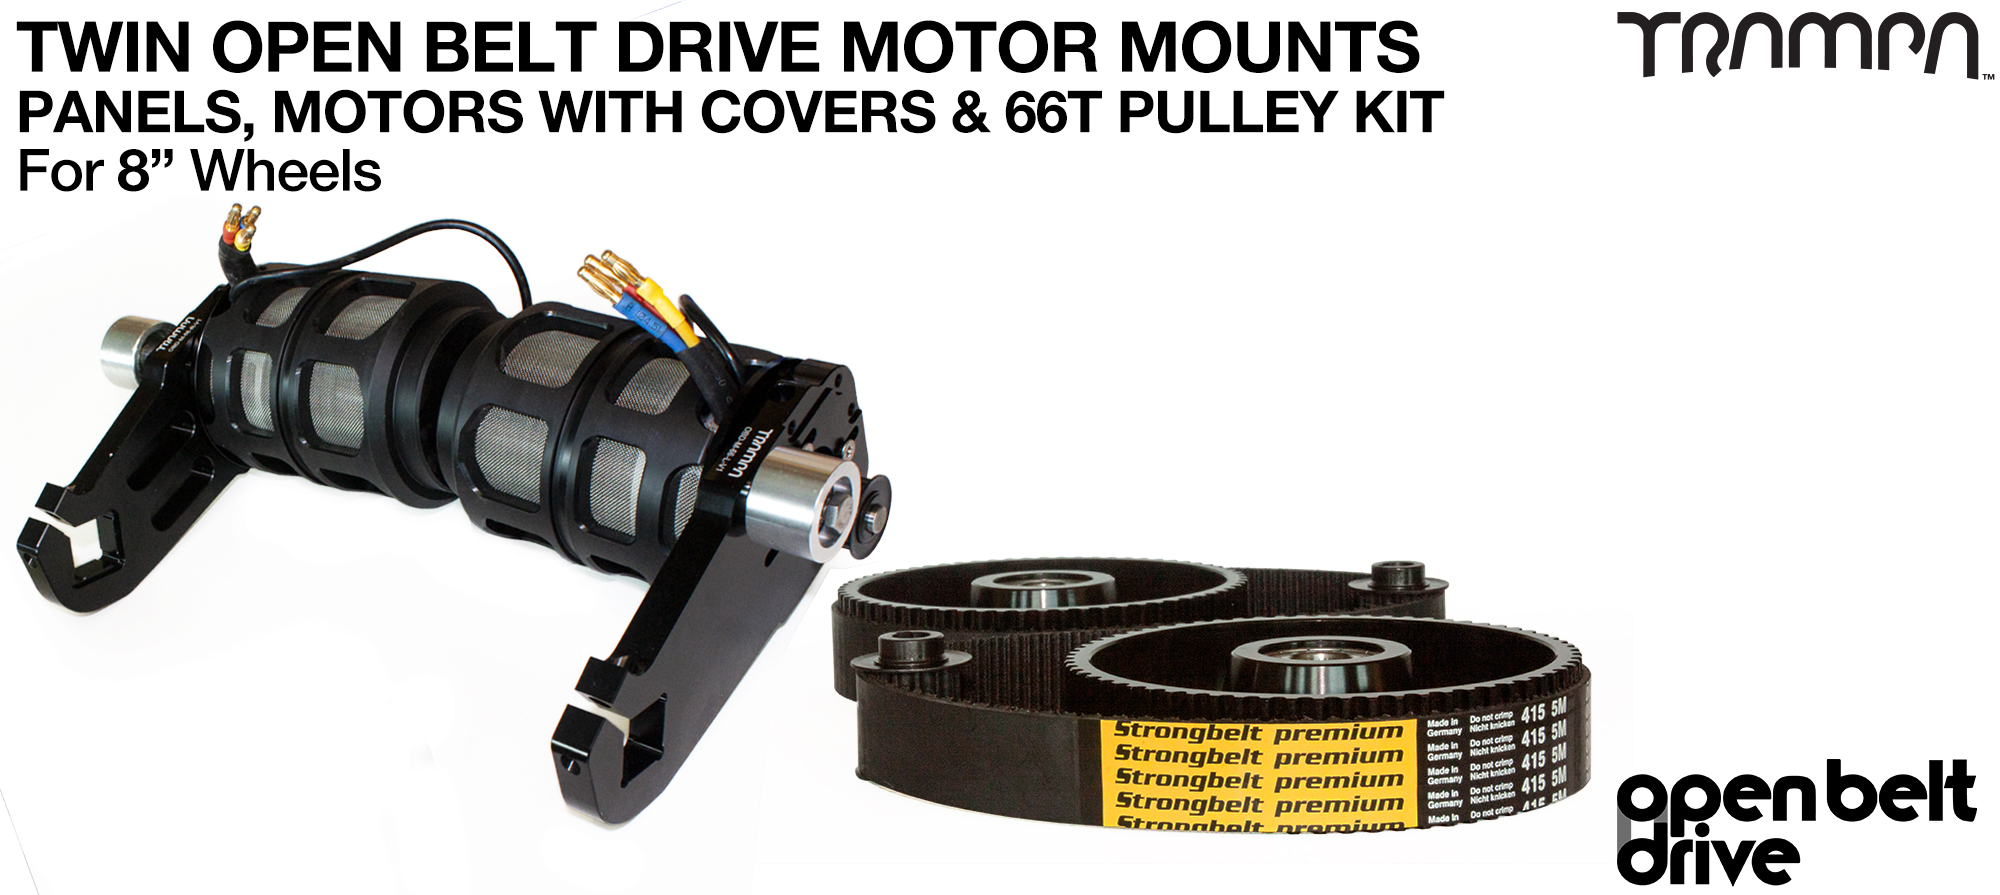 66T OBD Motor Mount with 66 tooth Pulley for 8 inch Wheels Custom TRAMPA Motor & Motor Protection Filter - TWIN